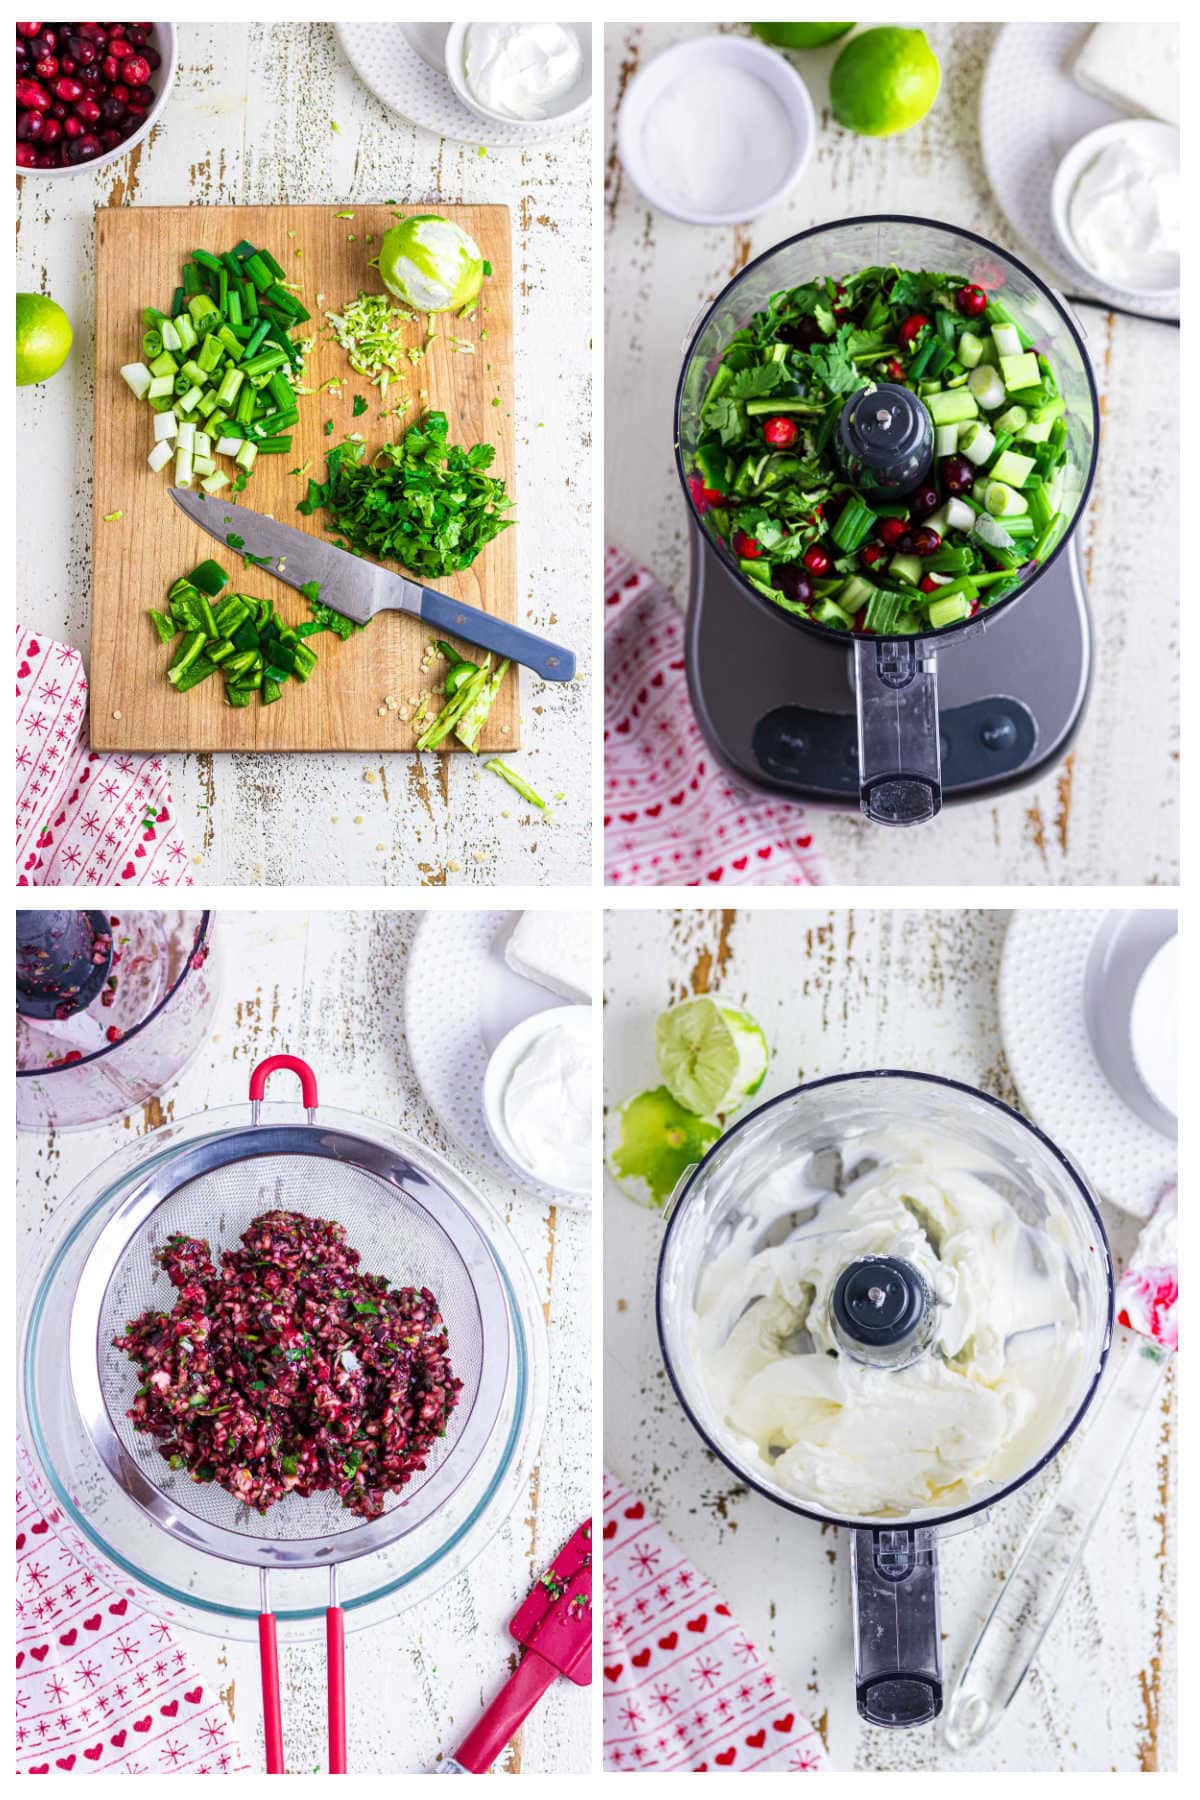 Four overhead images depicting the main recipe steps to prepare ingredients, blend, and combine the dip.